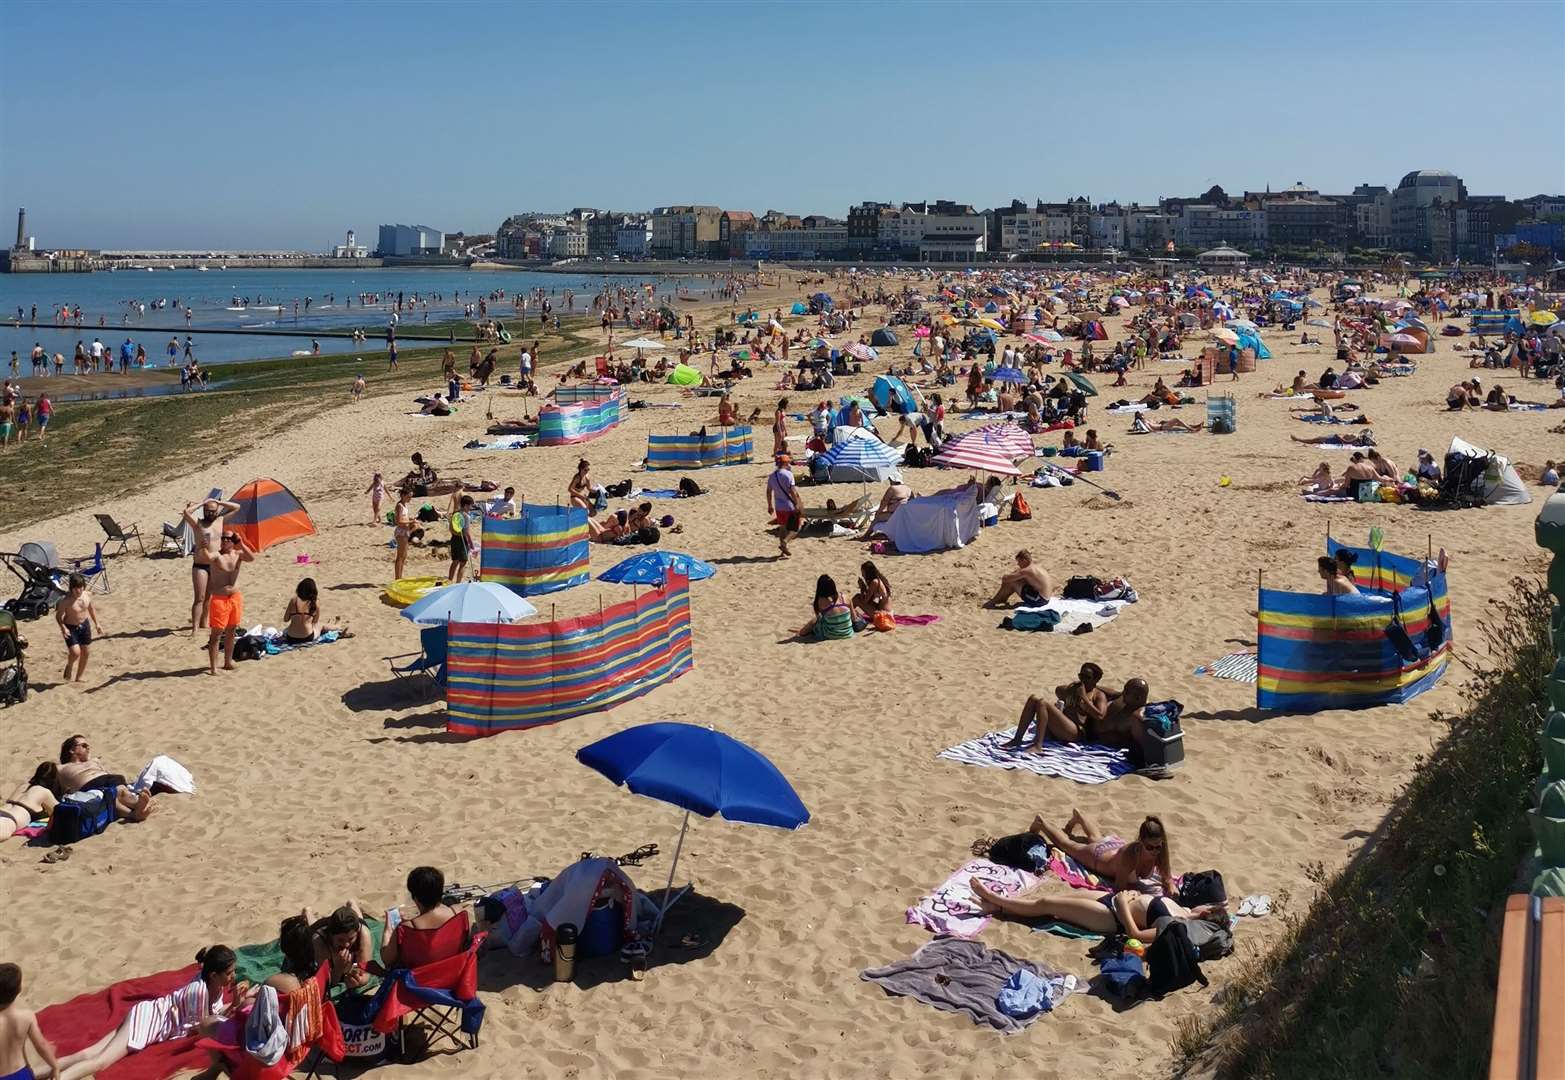 Hundreds of people headed to Thanet's beaches last weekend